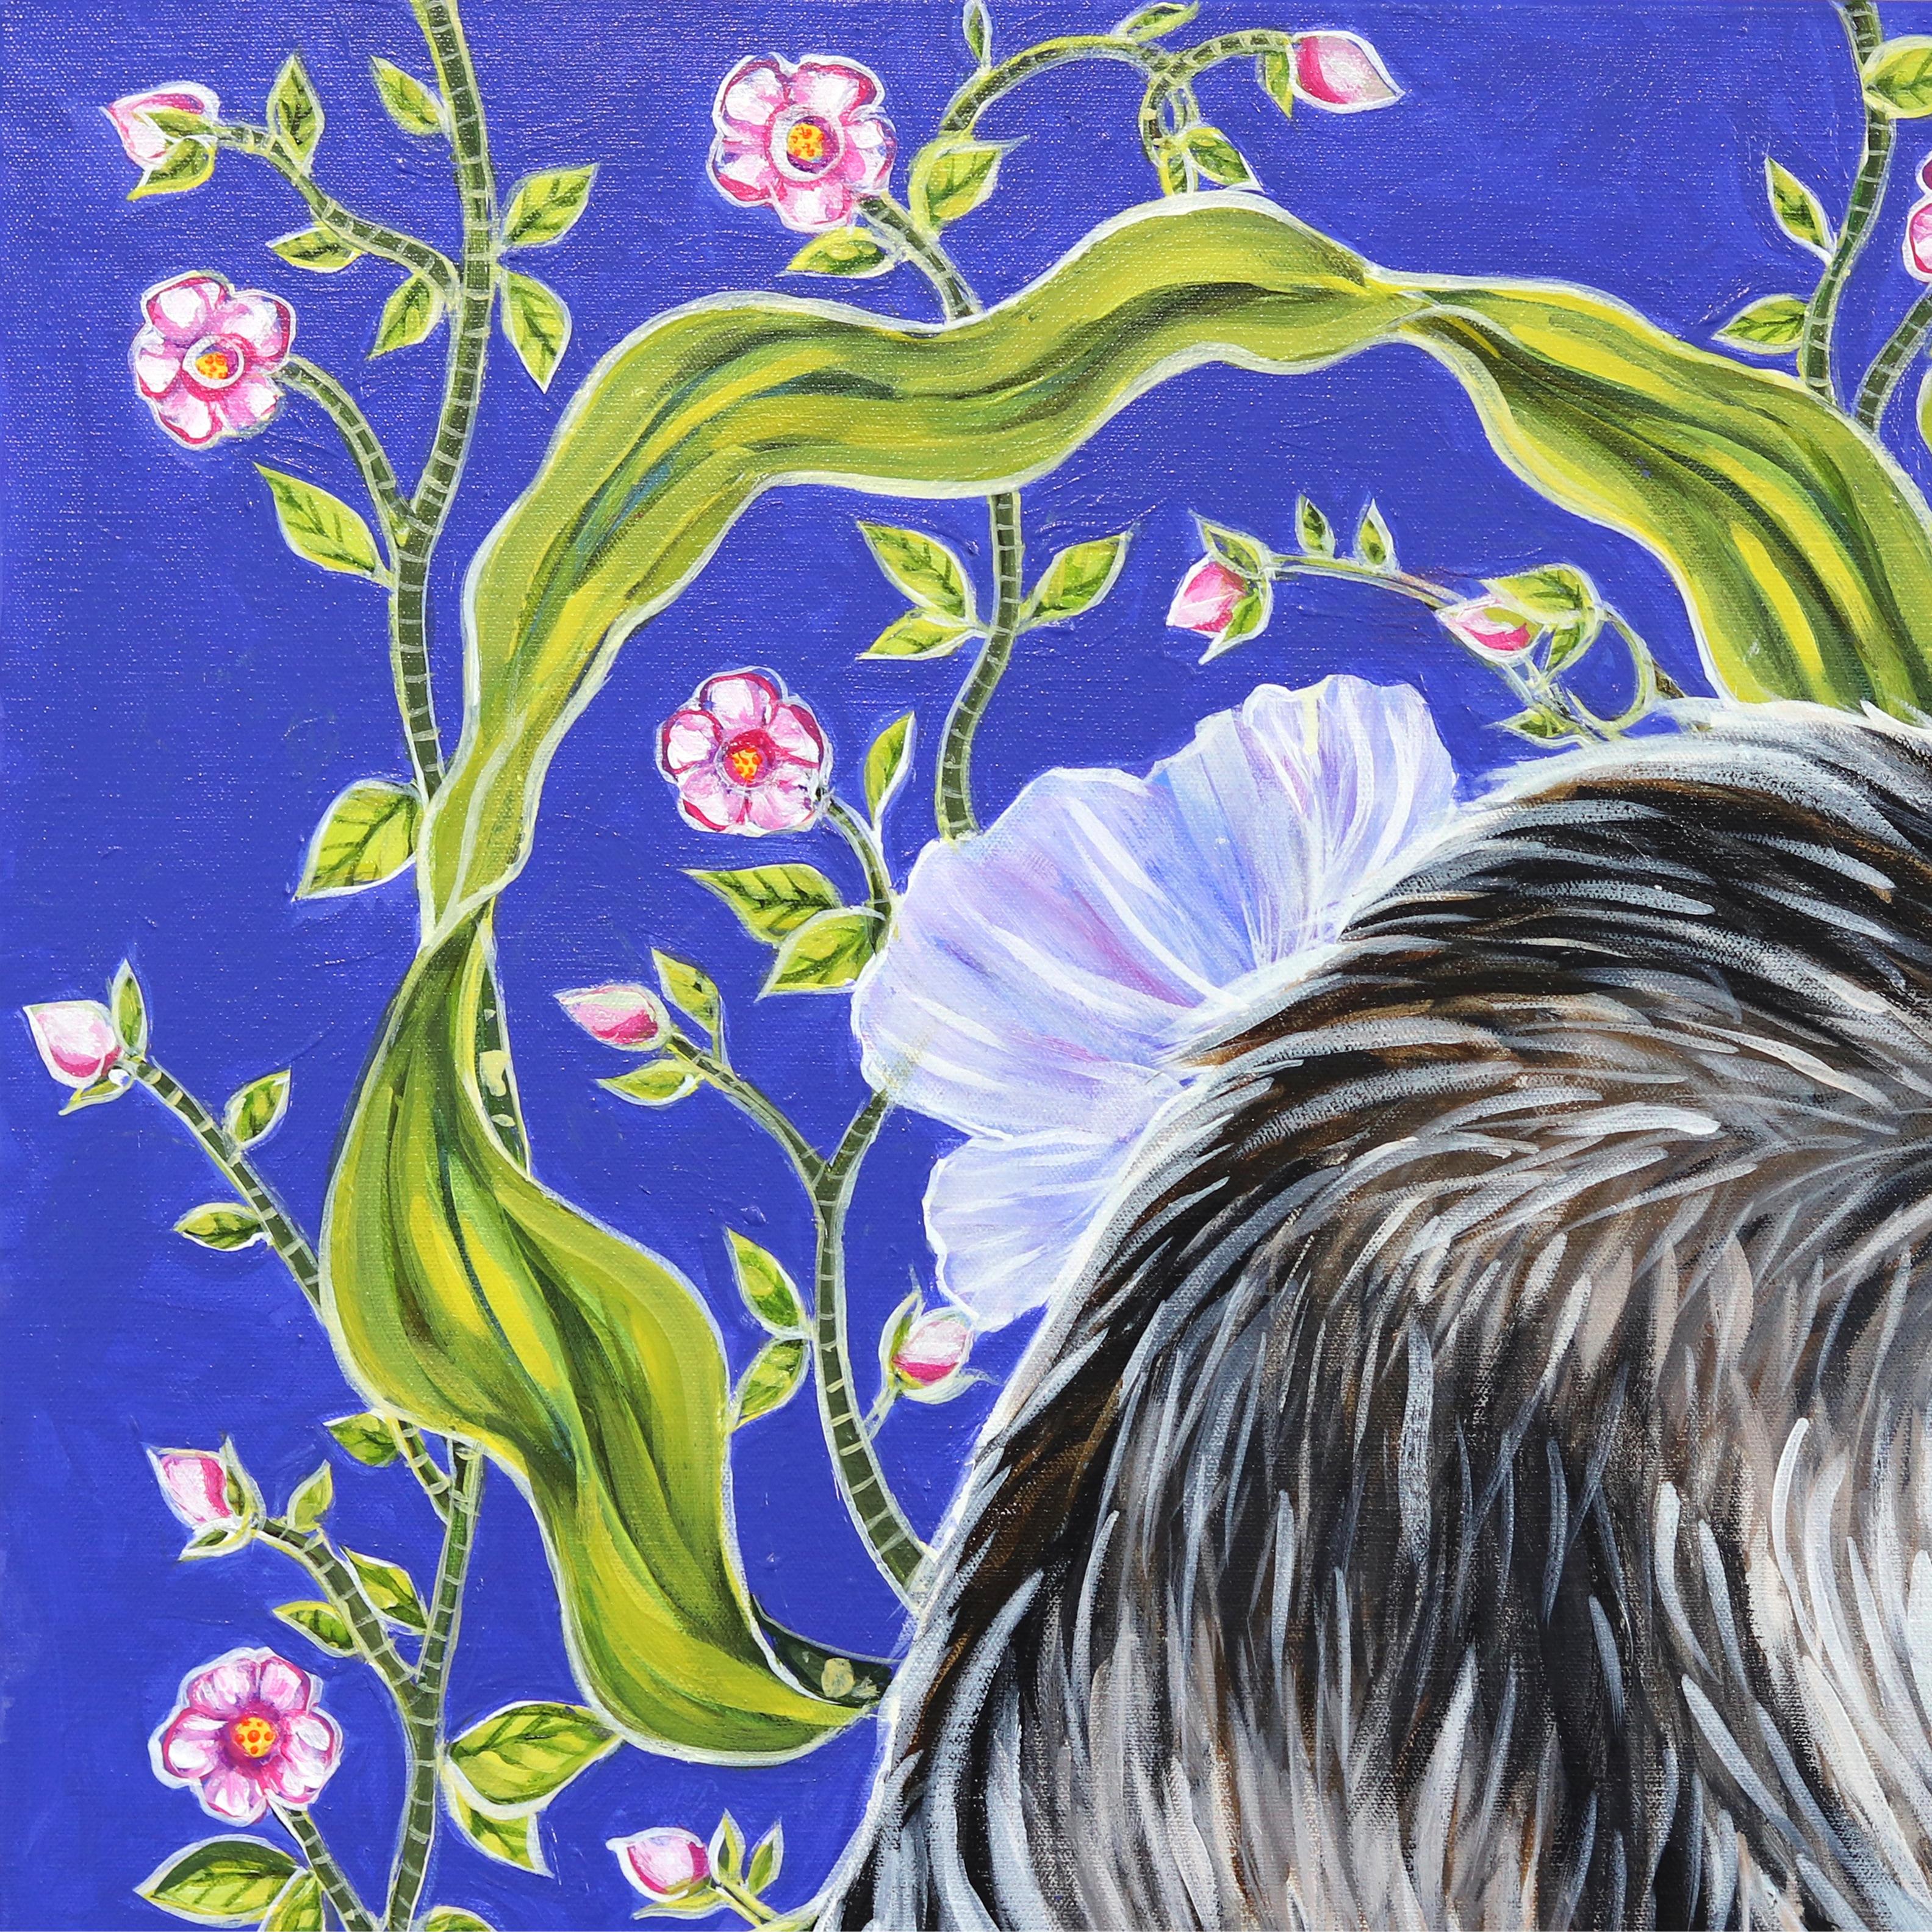 Naomi Jones's richly patterned realistic paintings focus on the preservation of vulnerable wildlife. Jones finds catharsis in painting soulful animals. Portraits of vulnerable species native to the North American landscape are painted with an